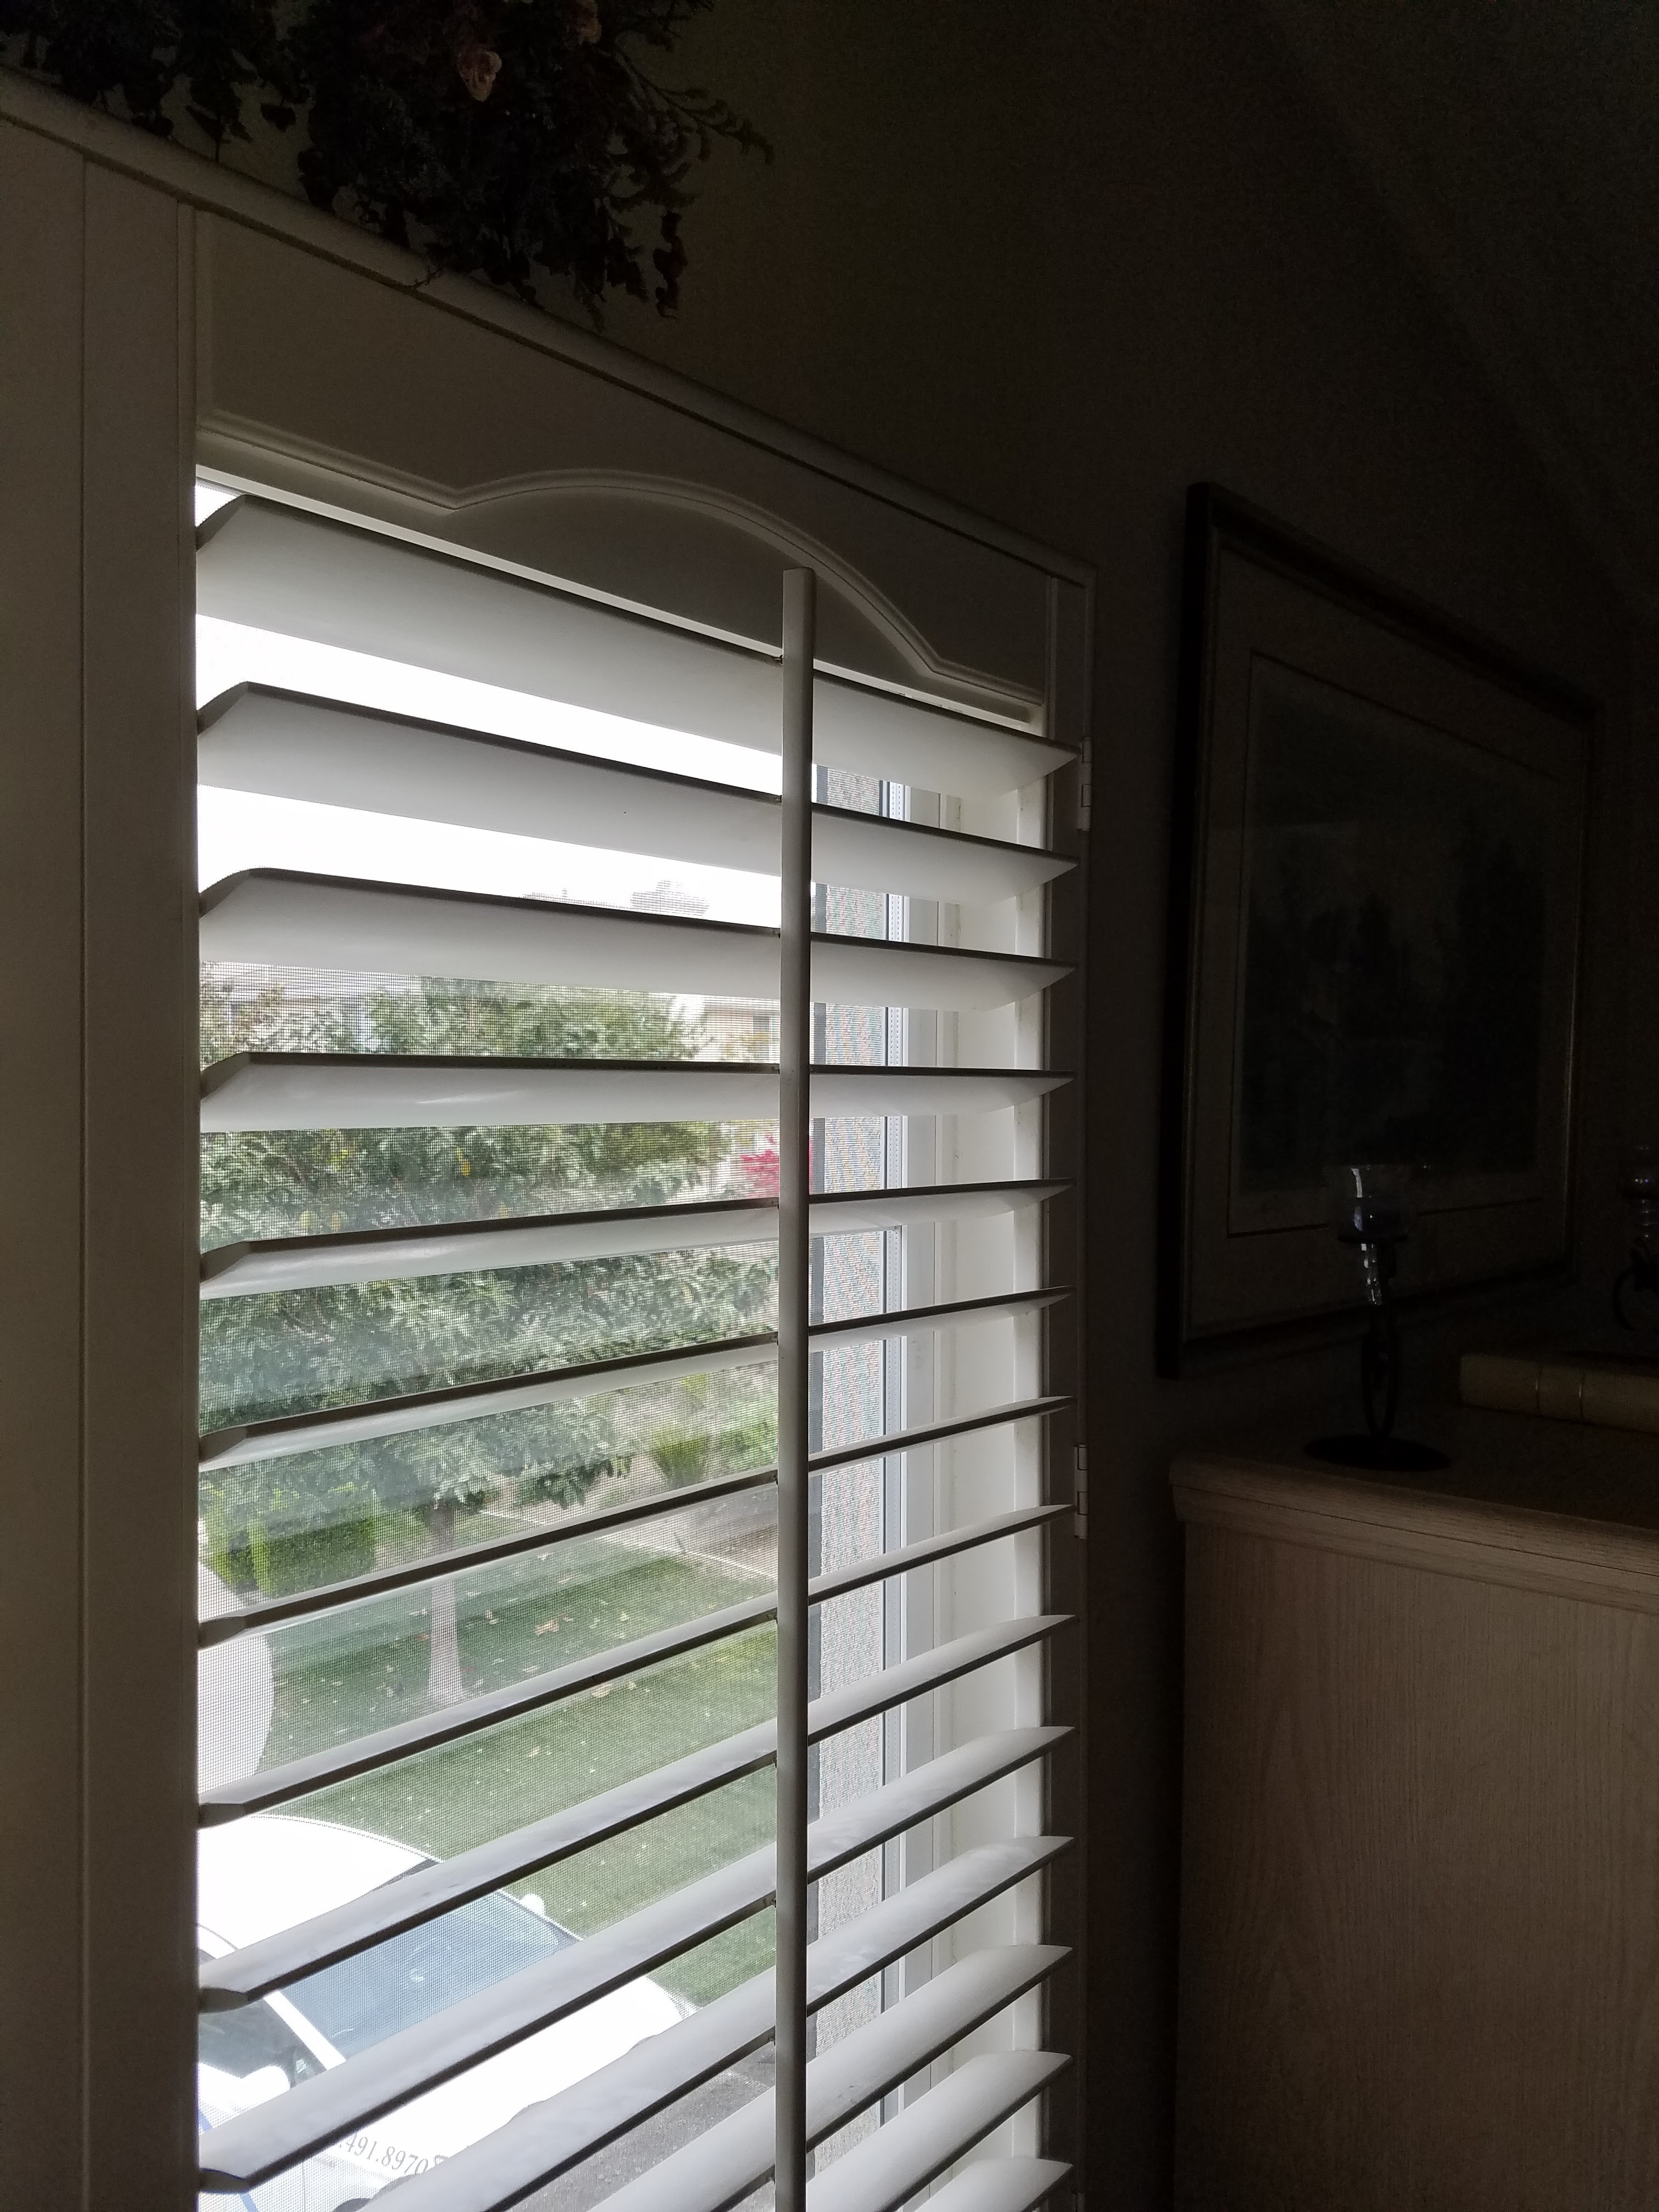 Image 20 | 805 Shutters Shades & Blinds